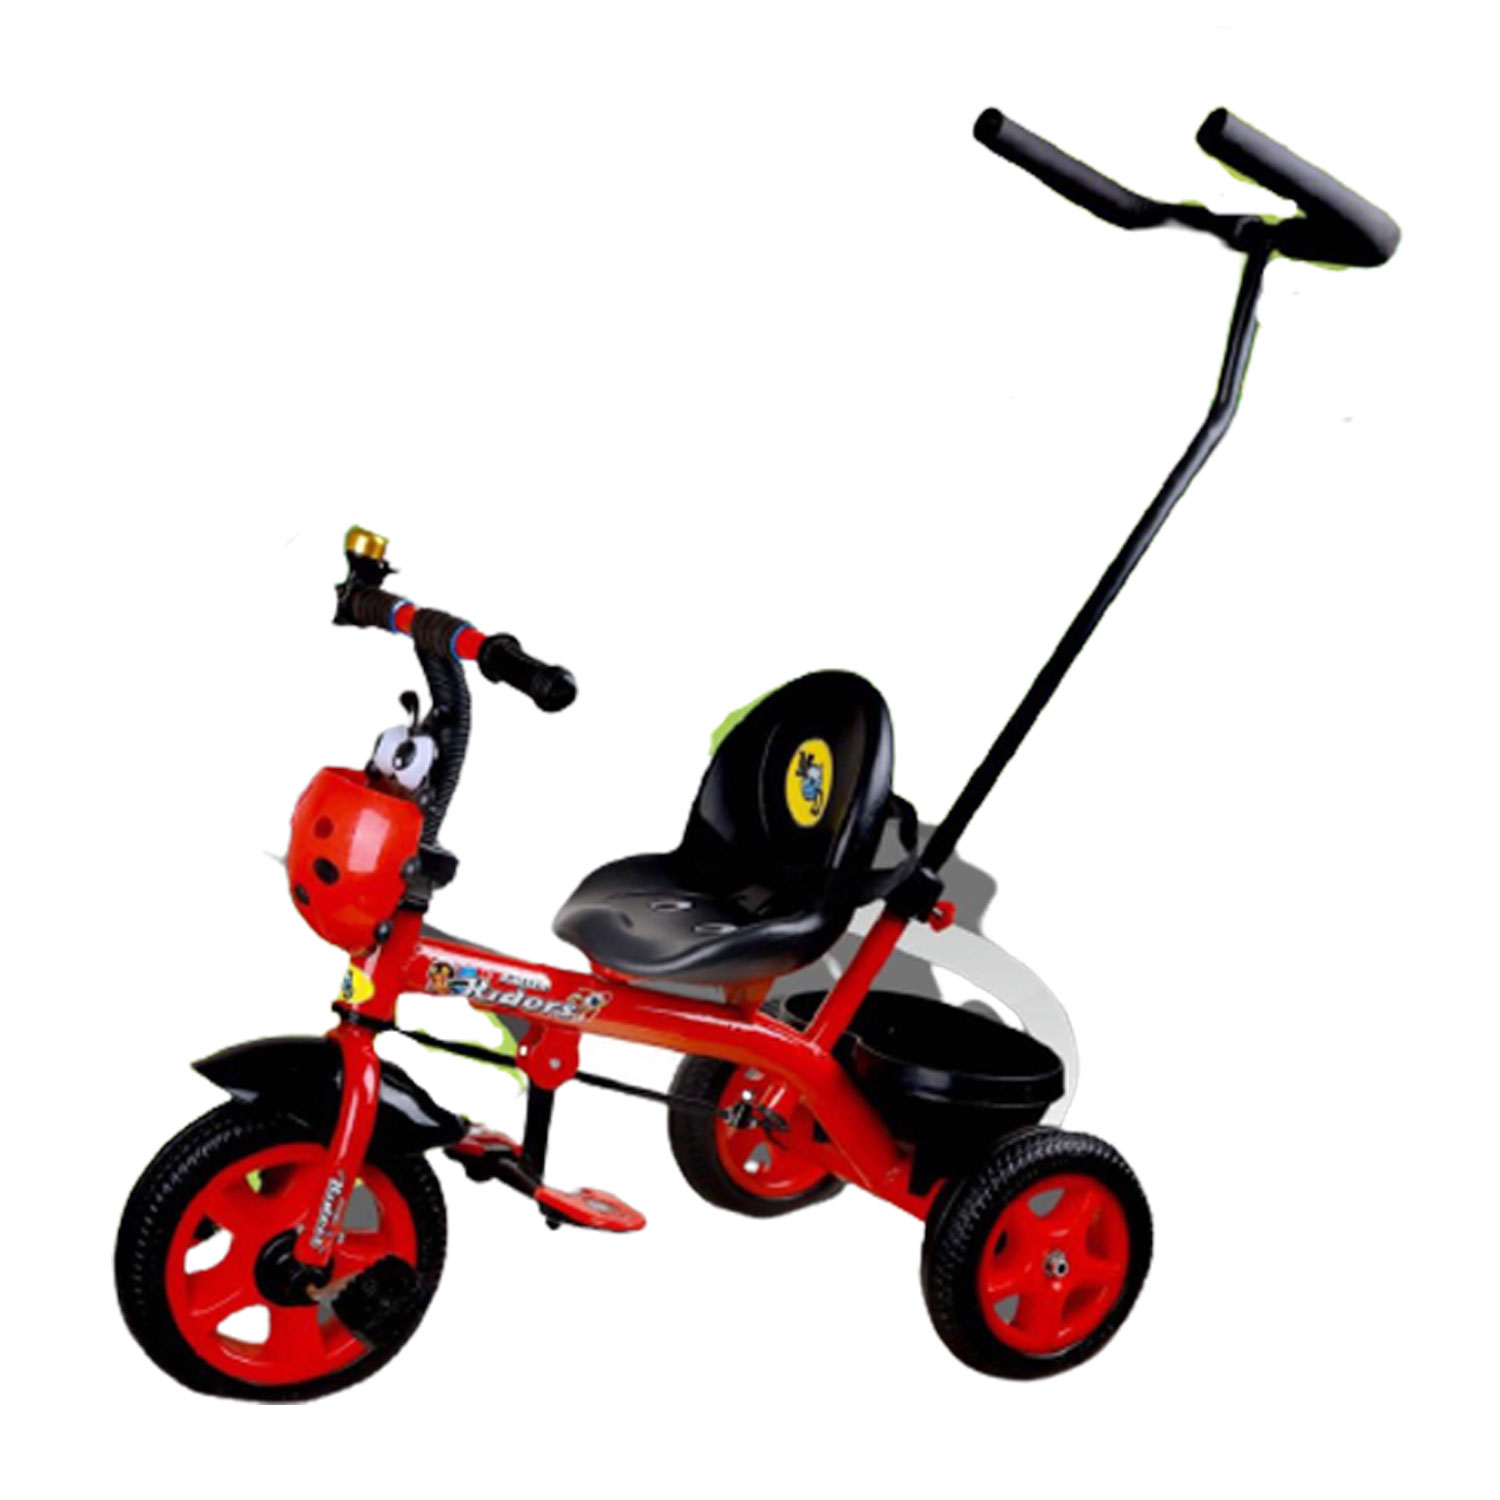 NAVRANGI BABY TRICYCLE FOR KIDS WITH FRONT OR BACK BASKET. TRICYCLE FOR KIDS  MD-114 